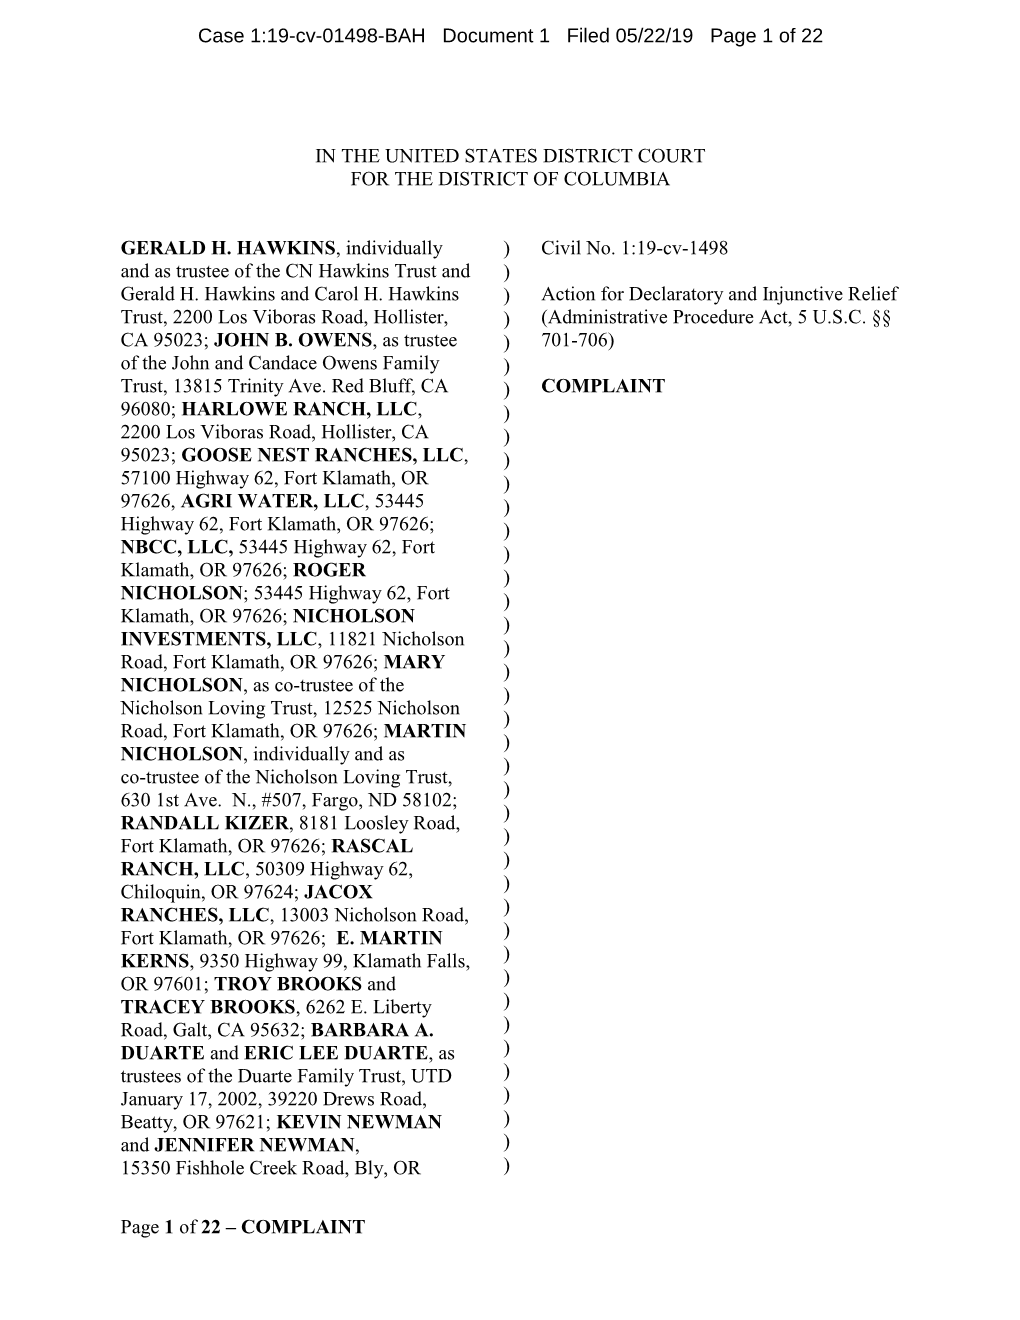 Case 1:19-Cv-01498-BAH Document 1 Filed 05/22/19 Page 1 of 22